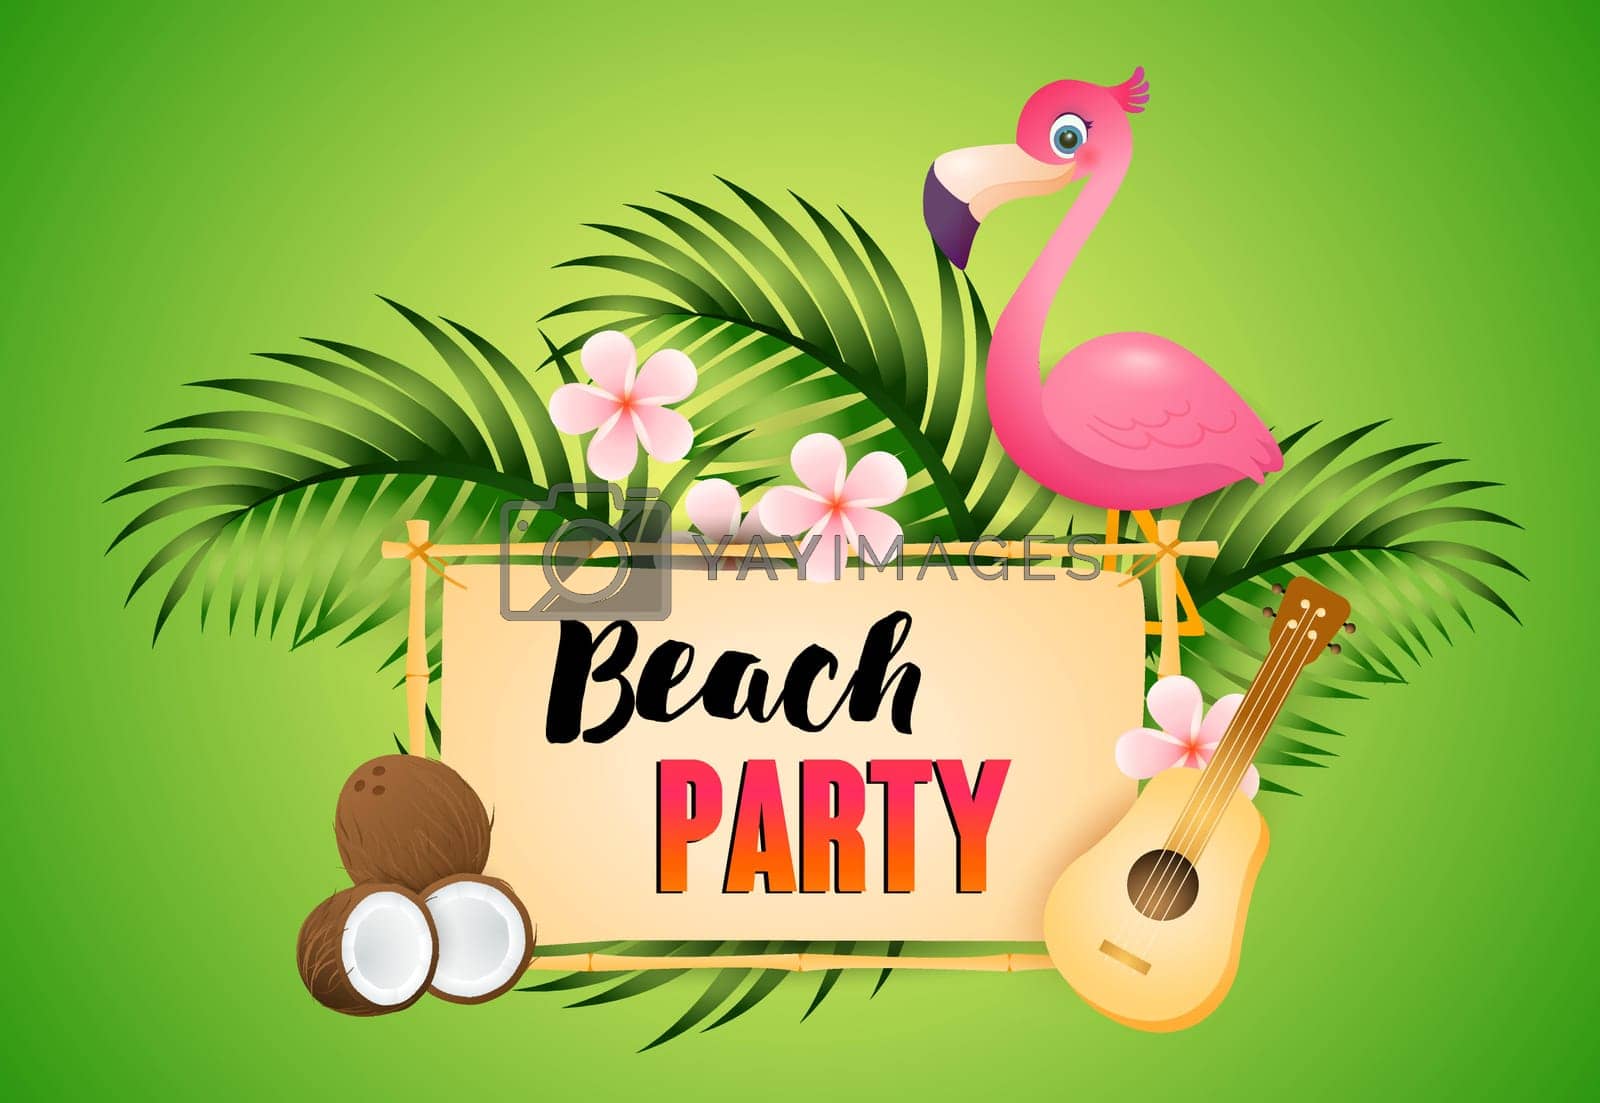 Royalty free image of Beach Party lettering with flamingo, ukulele and coconut by pchvector